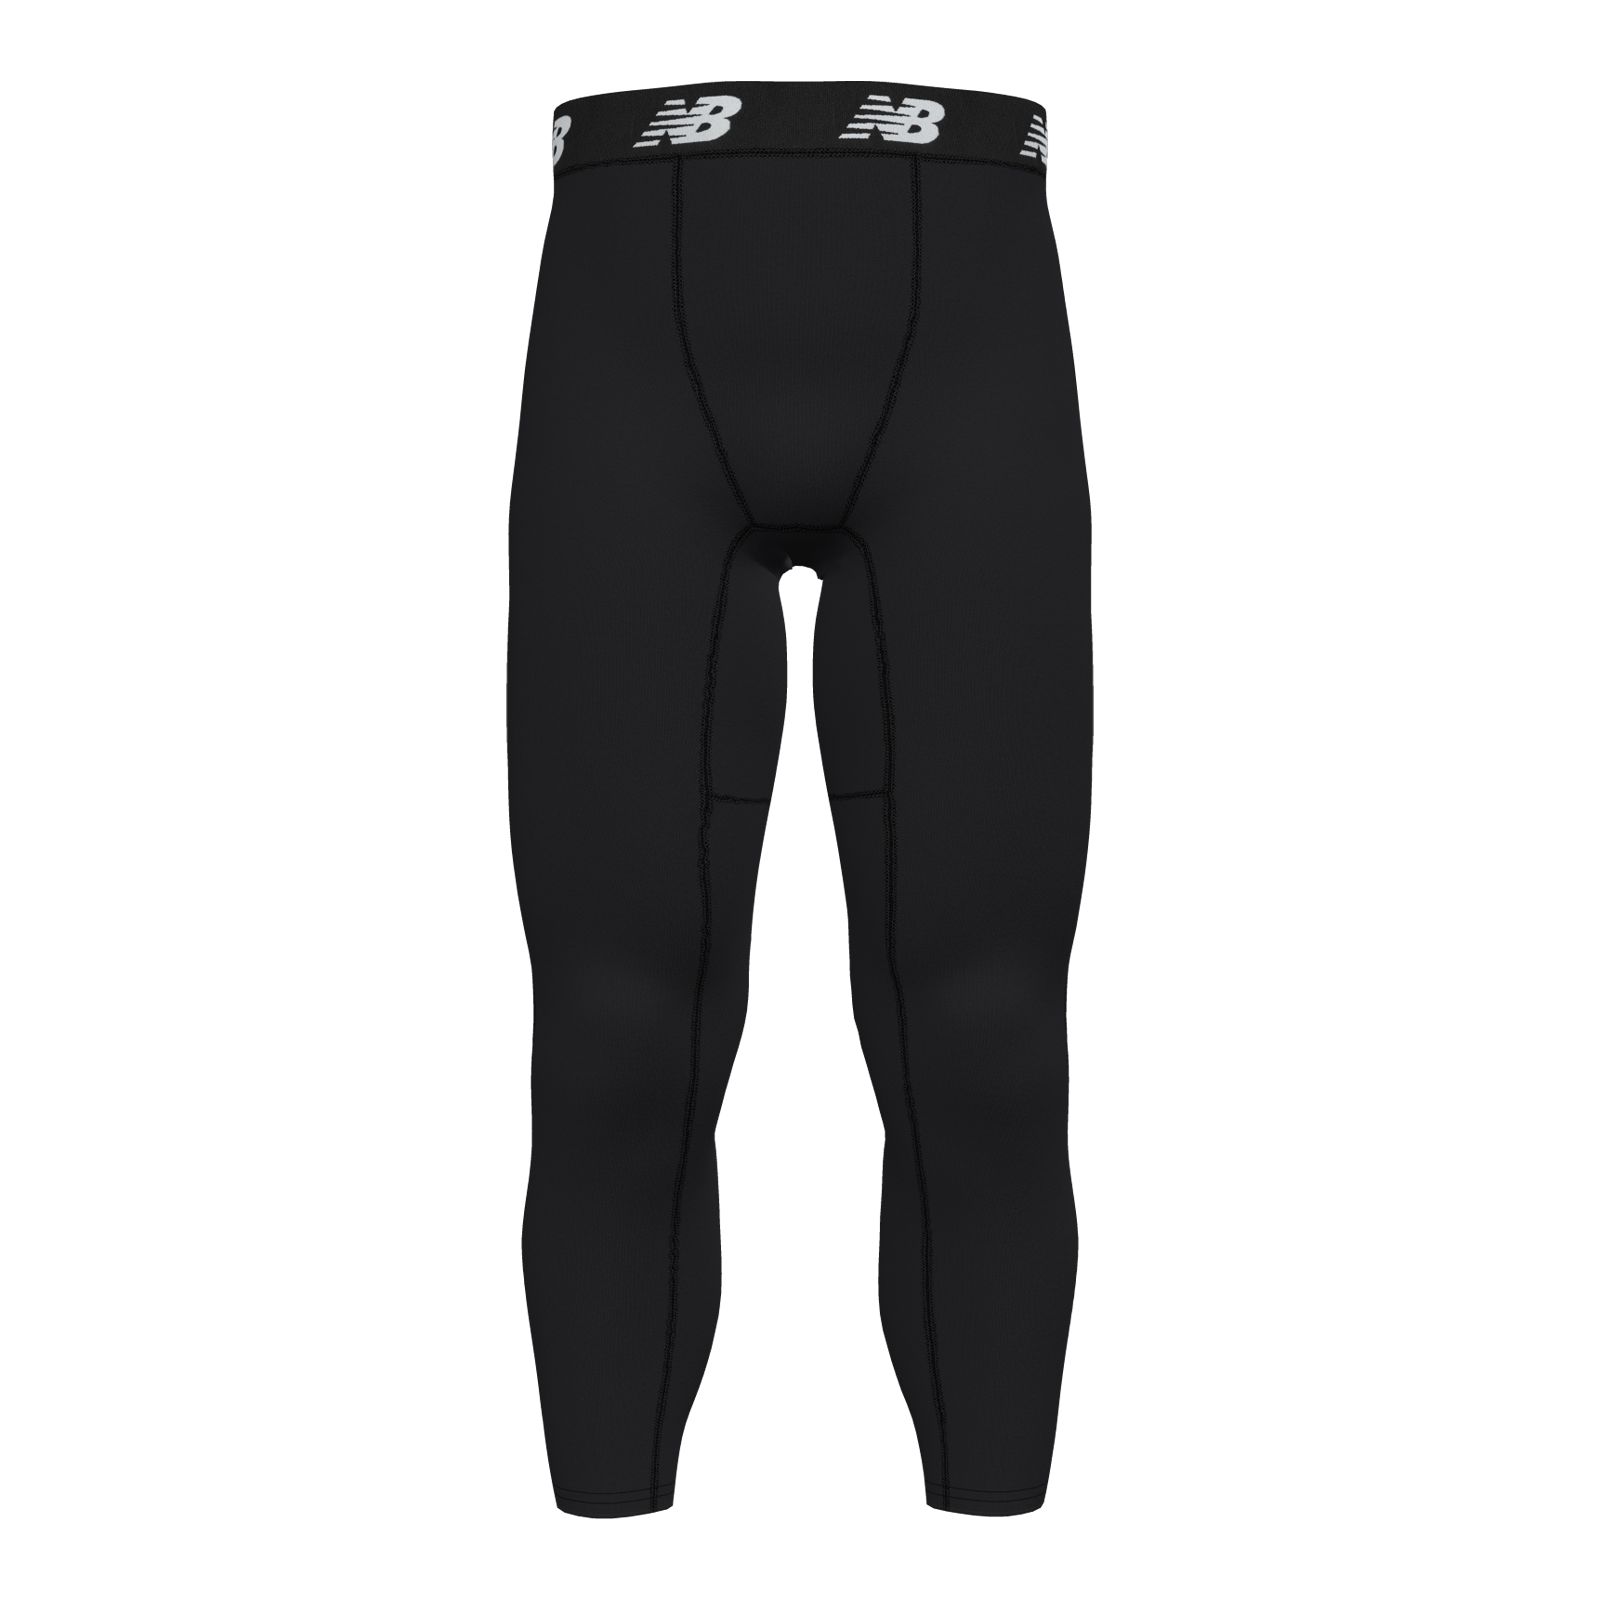 One Leg 3/4 Compression Tights (White) - For Basketball, Football &  Lacrosse